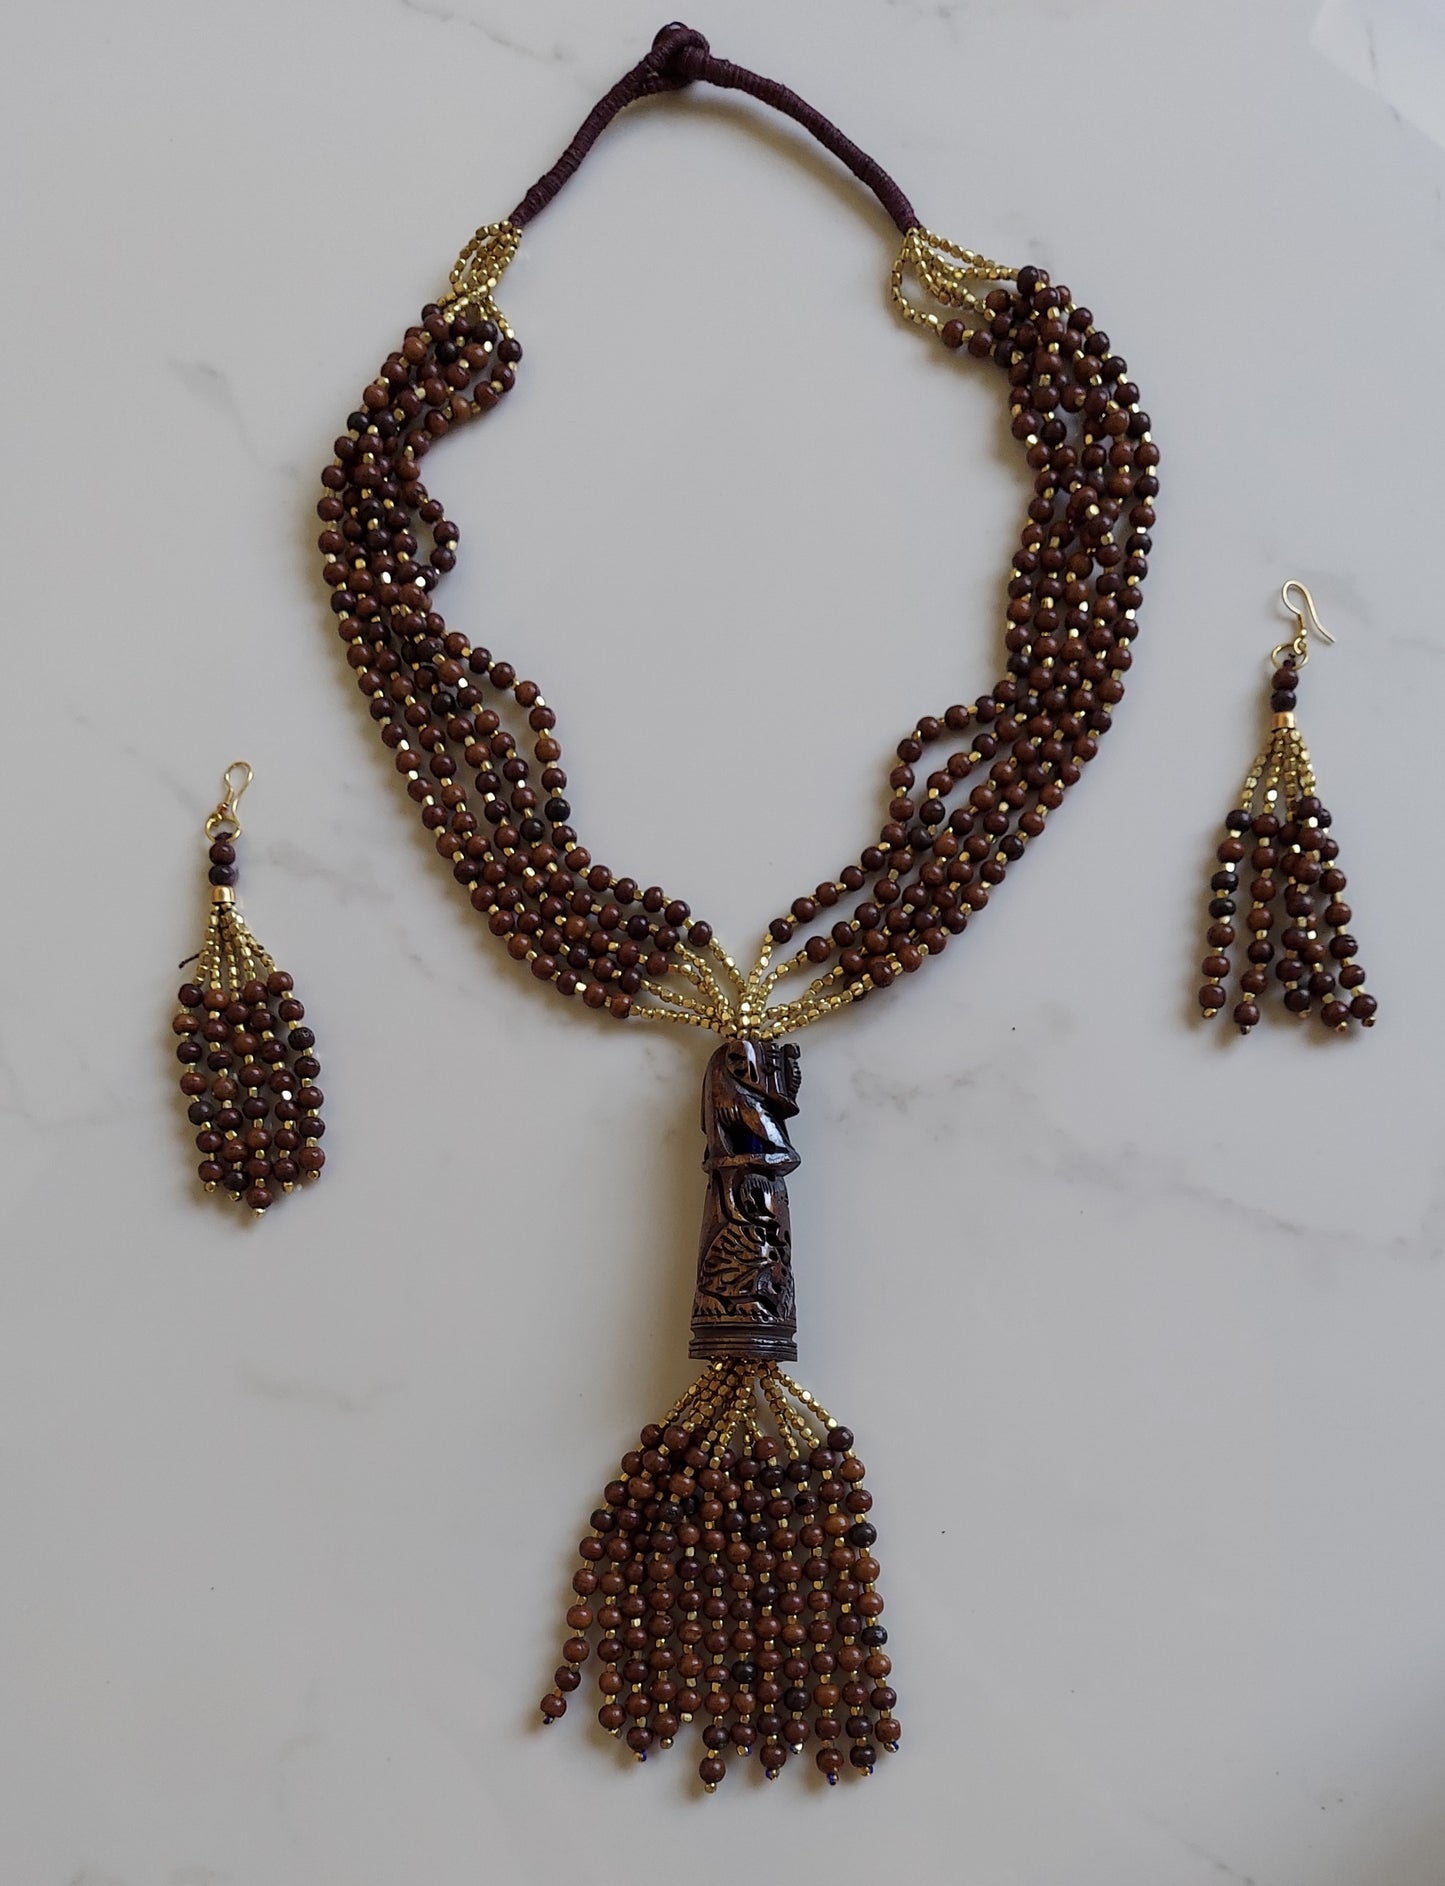 Long Layered Beaded Necklace & Earrings Set- Carved Elephant Pendant